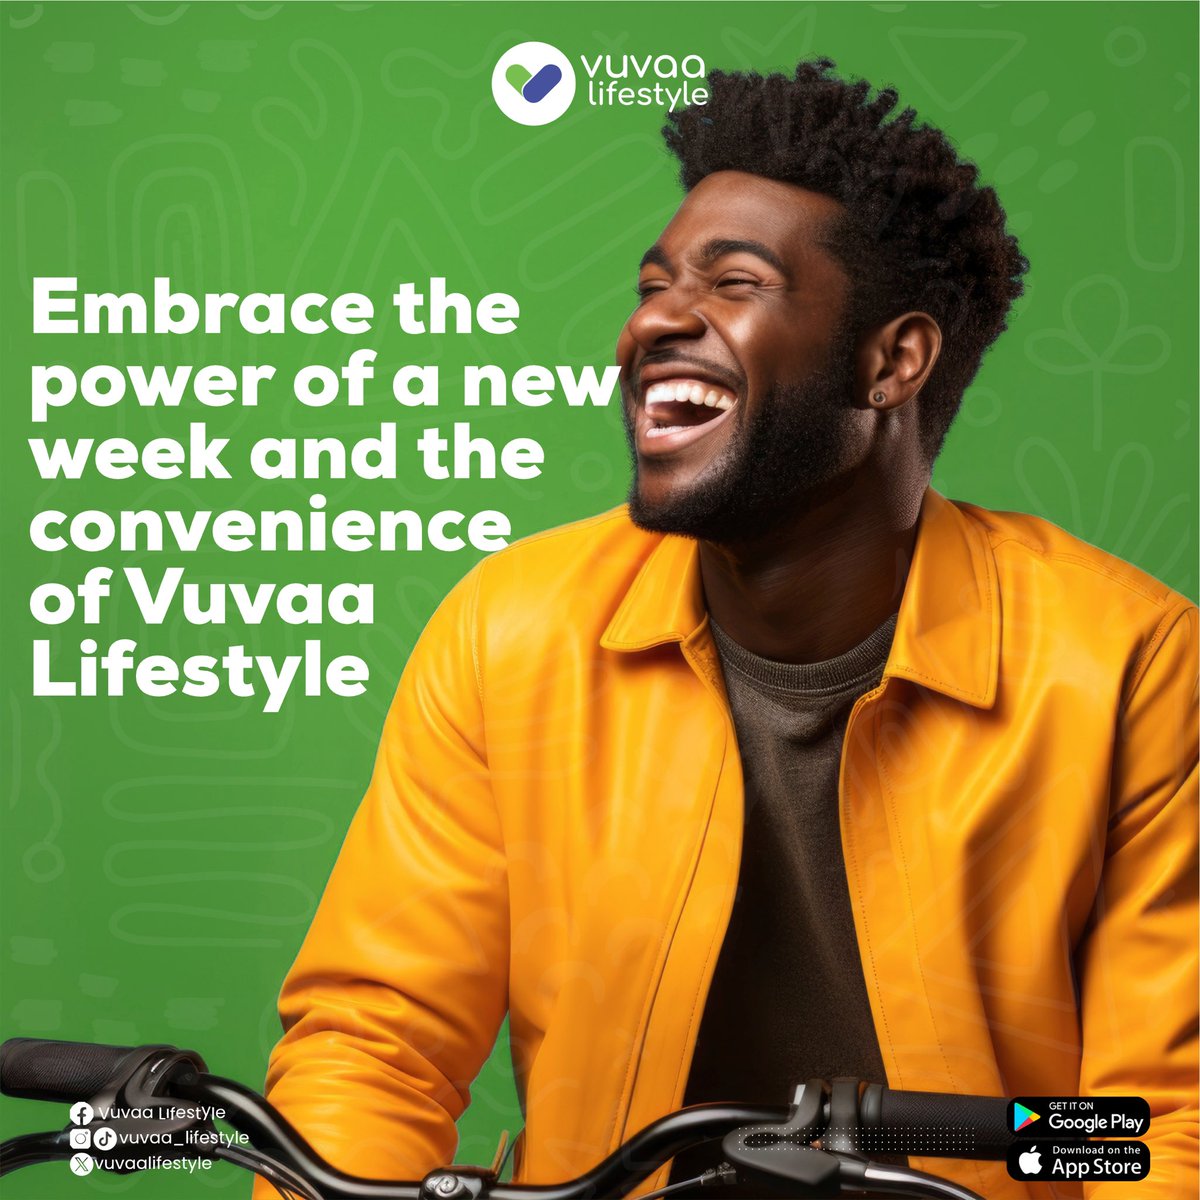 Enjoy the advantages of Vuvaa lifestyle and stay motivated this new week.

#USDT #LionelMessi #BalonDor #AMAA2023 #IyaboOjo #lifeissweetwithvuvaa